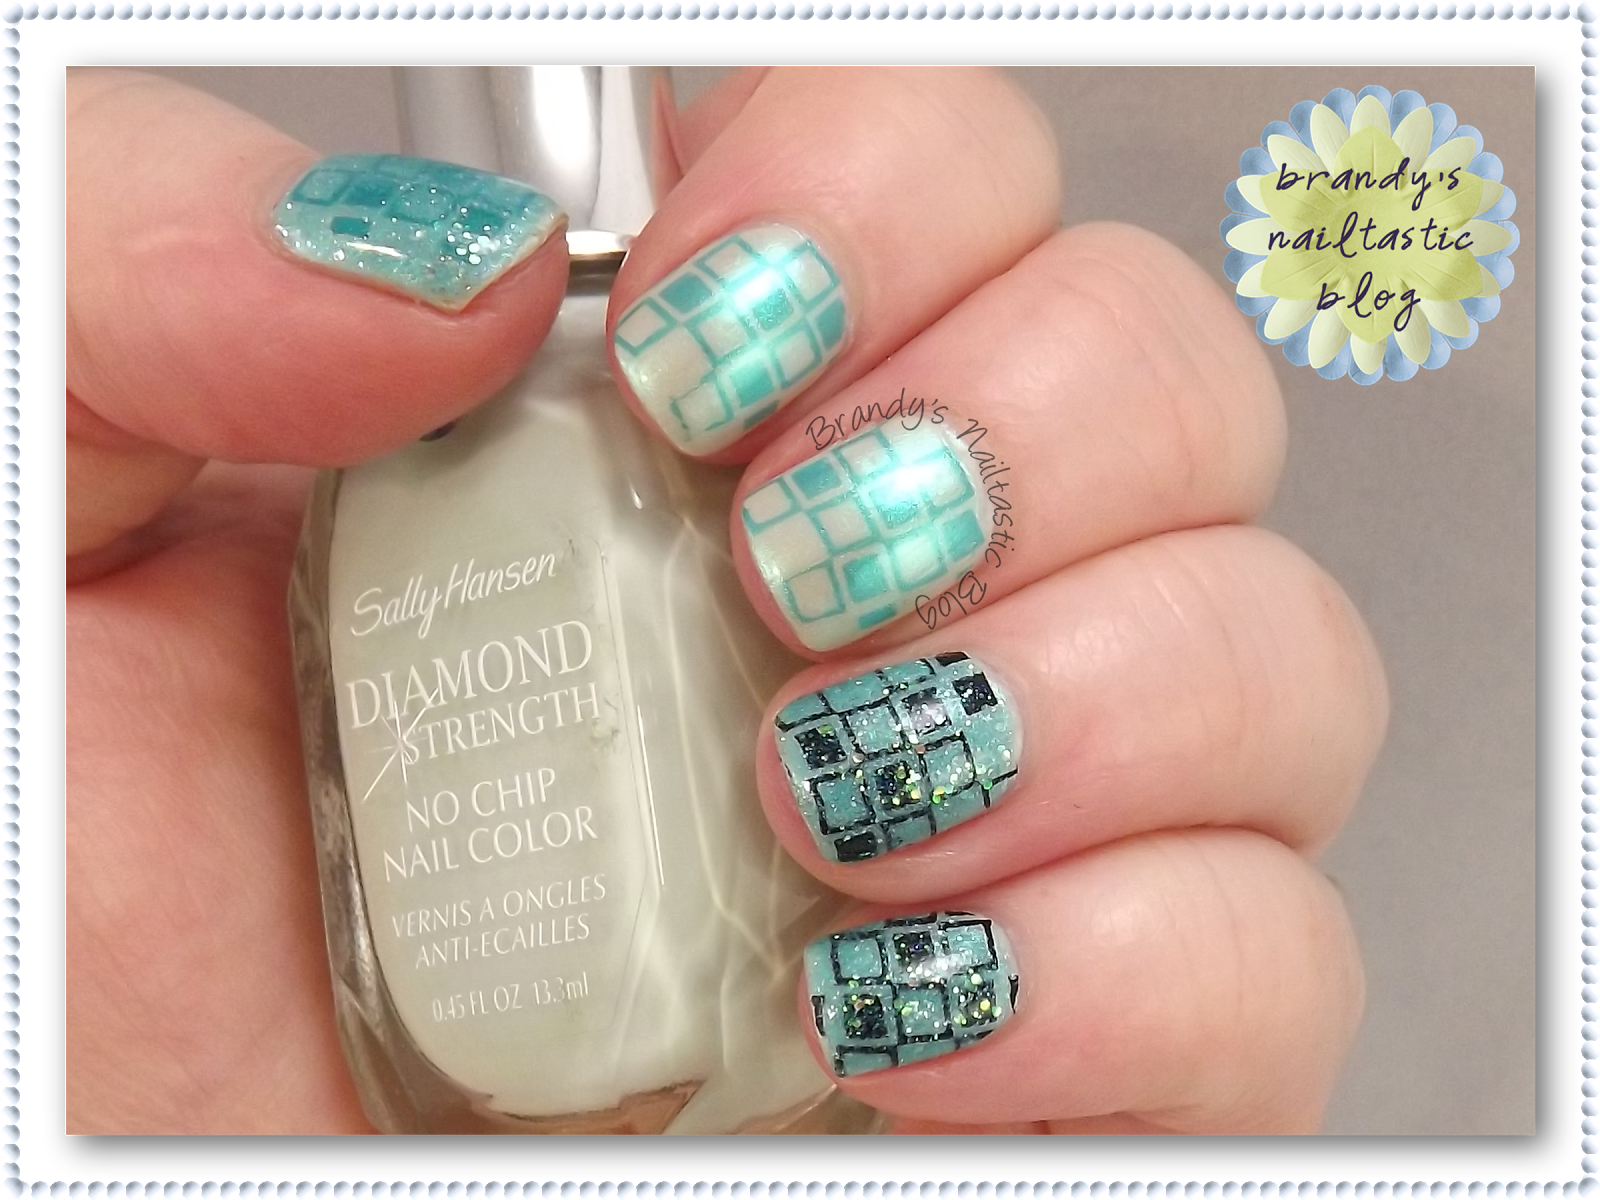 2. Teal and White Marble Nail Design - wide 5